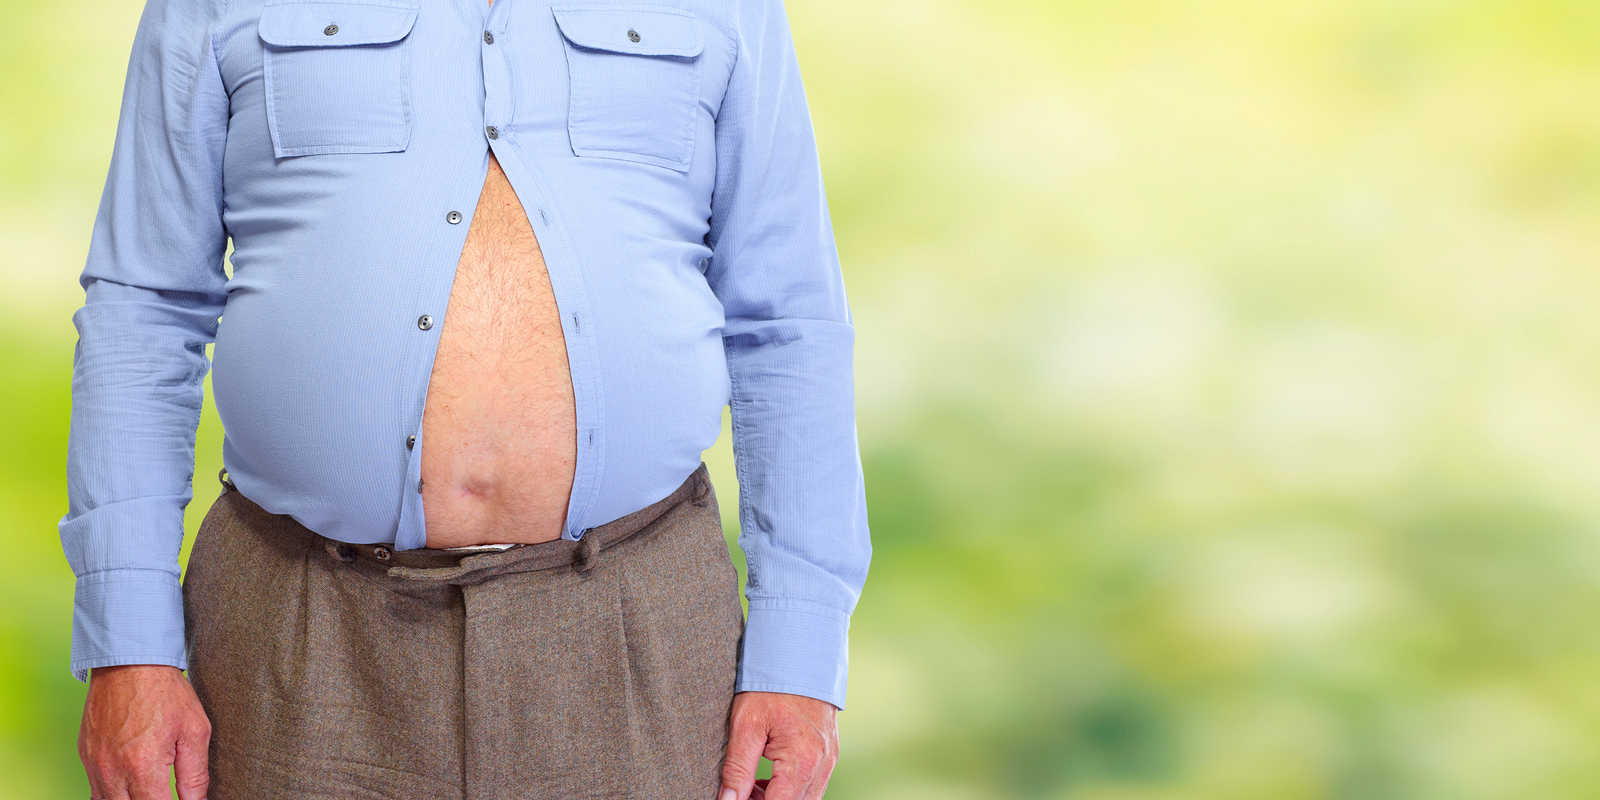 Obese patients more prone to infection after heart surgery